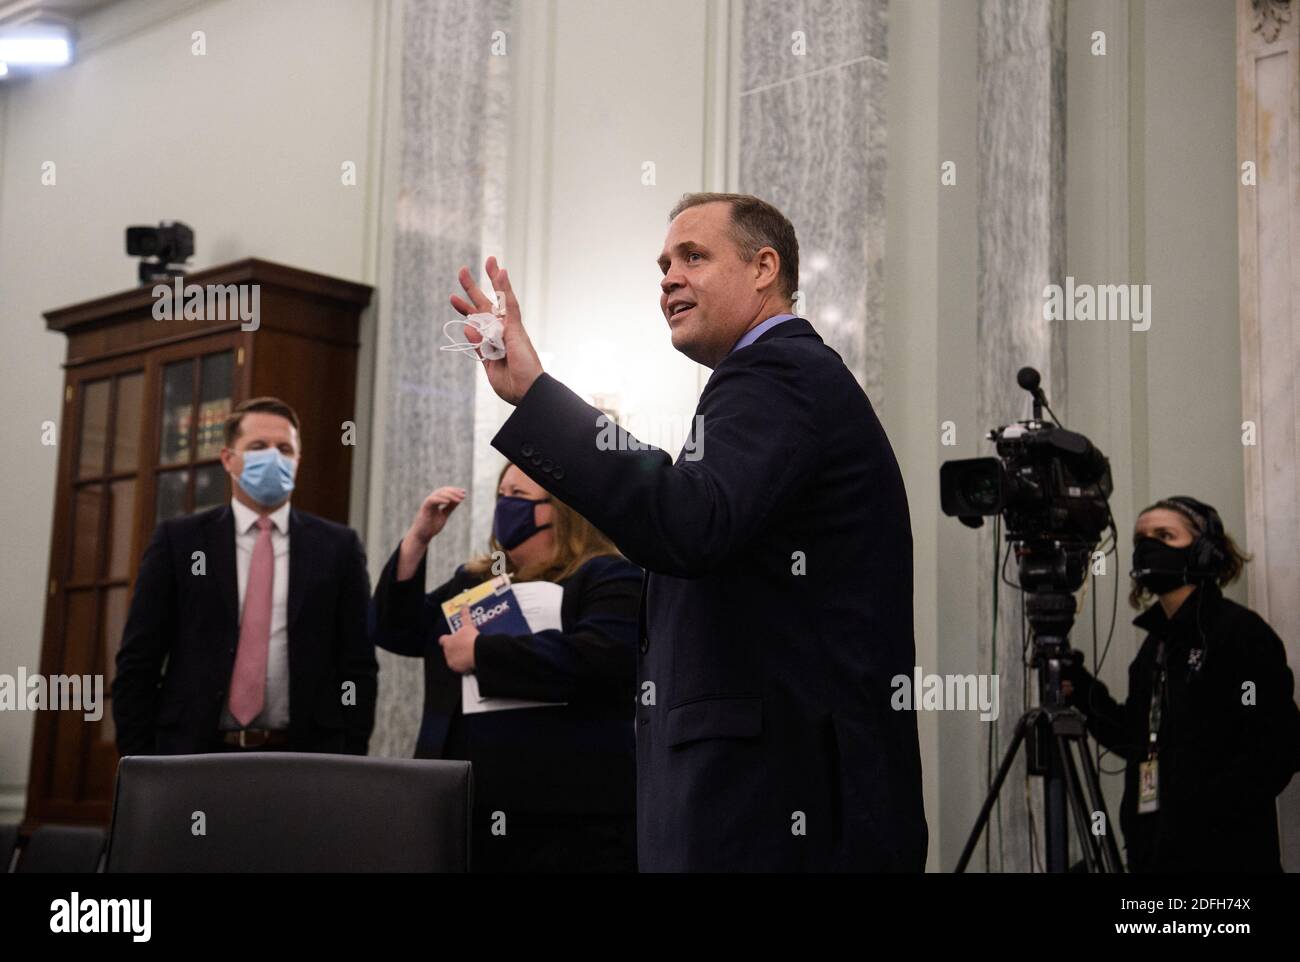 NASA Administrator Jim Bridenstine waves after testifying before the US Senate Commerce, Science and Transportation committee on Capitol Hill in Washington, DC, on September 30, 2020. Photo by Nicholas Kamm/Pool/ABACAPRESS.COM Stock Photo